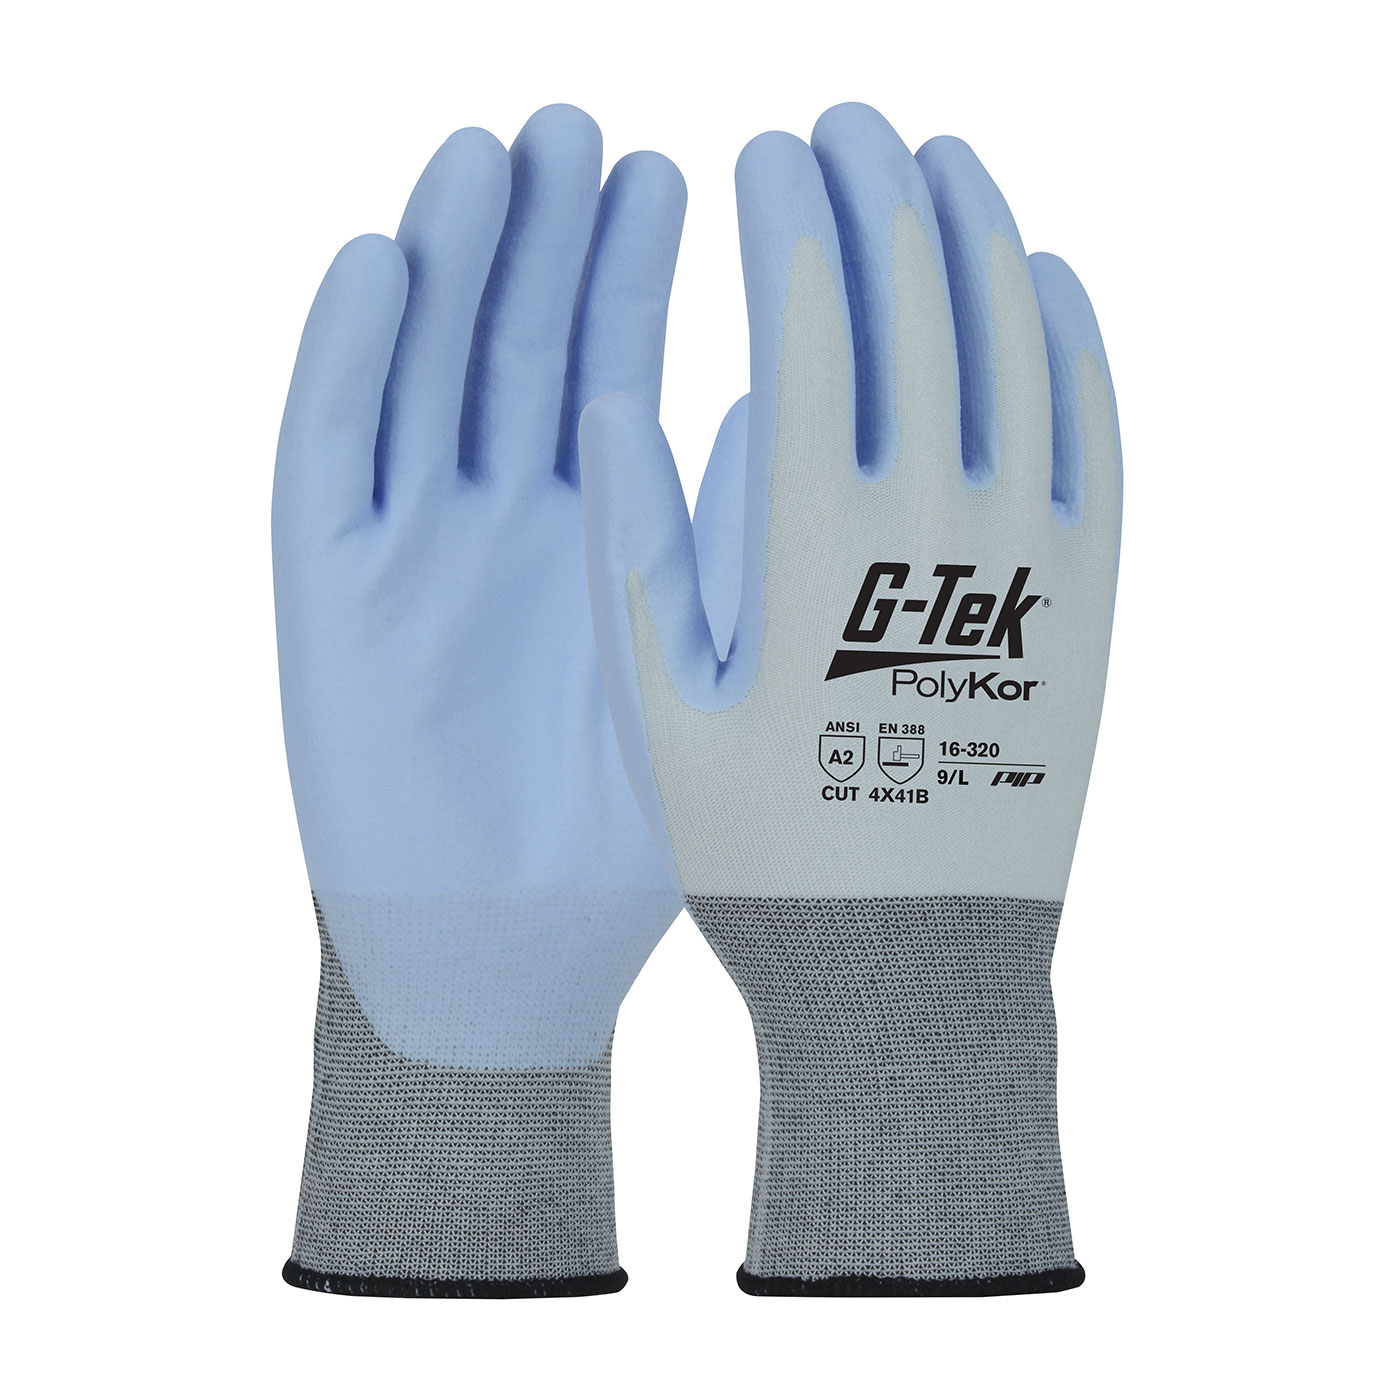 #16-320 PIP® G-Tek® PolyKor® X7™ Seamless Knit X7™ Blended Glove with NeoFoam® Coated Palm & Fingers - Touchscreen Compatible 